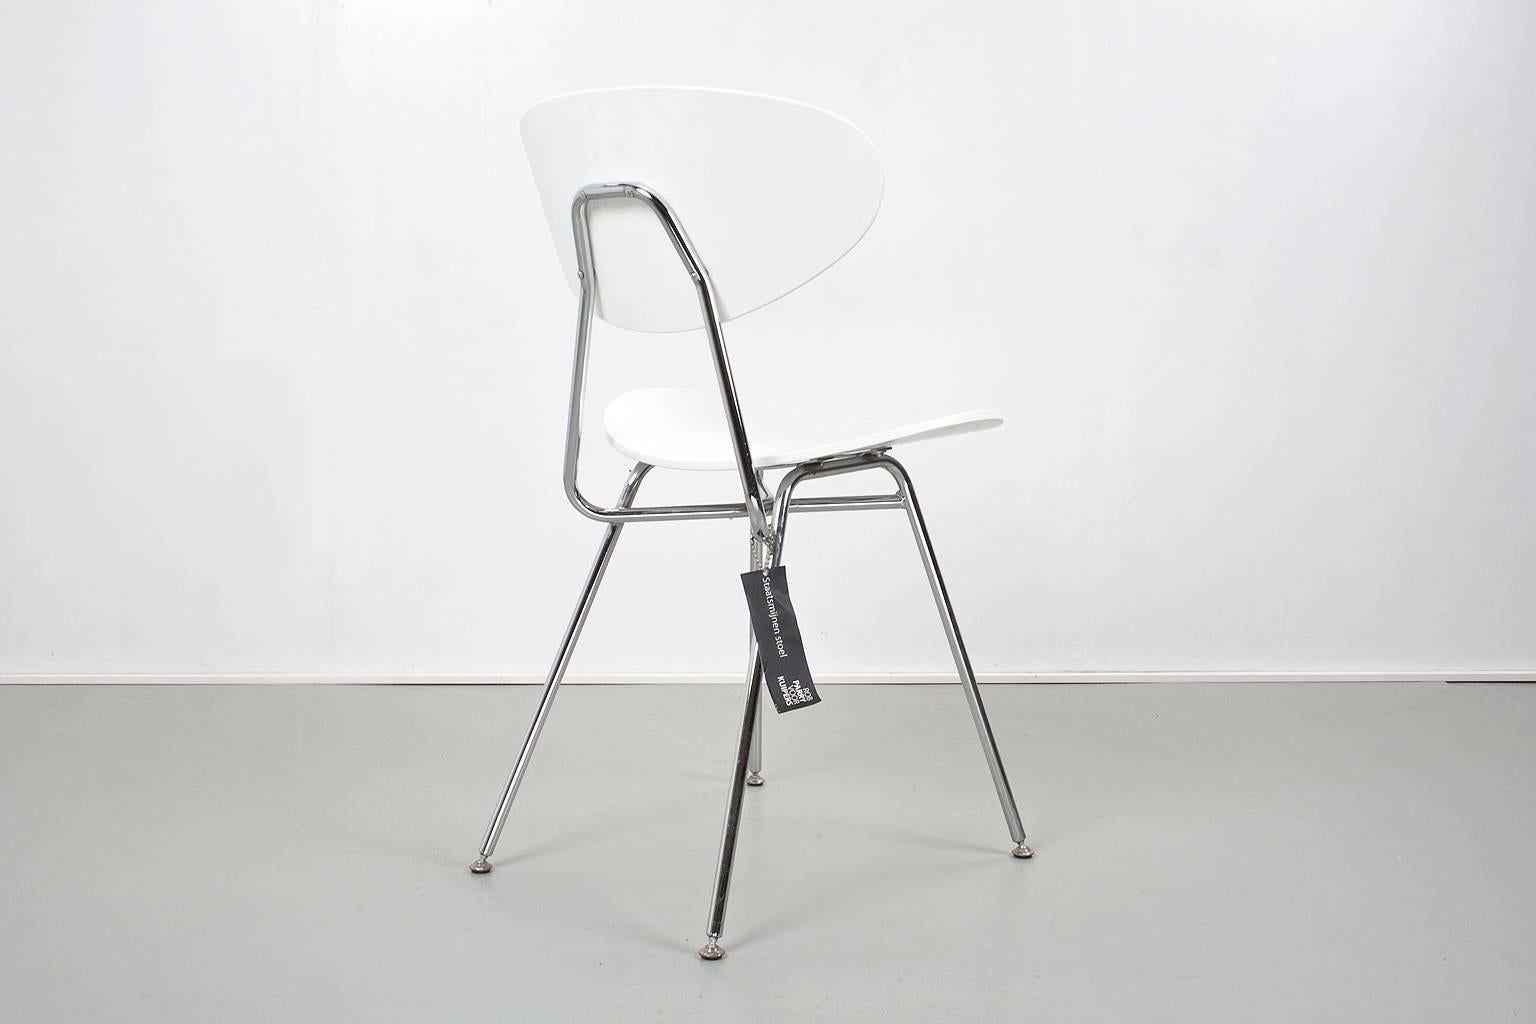 In 1955 Dutch industrial designers Rob Parry and Emile Truijen designed a project chair for the new office of the Dutch State Mining company (